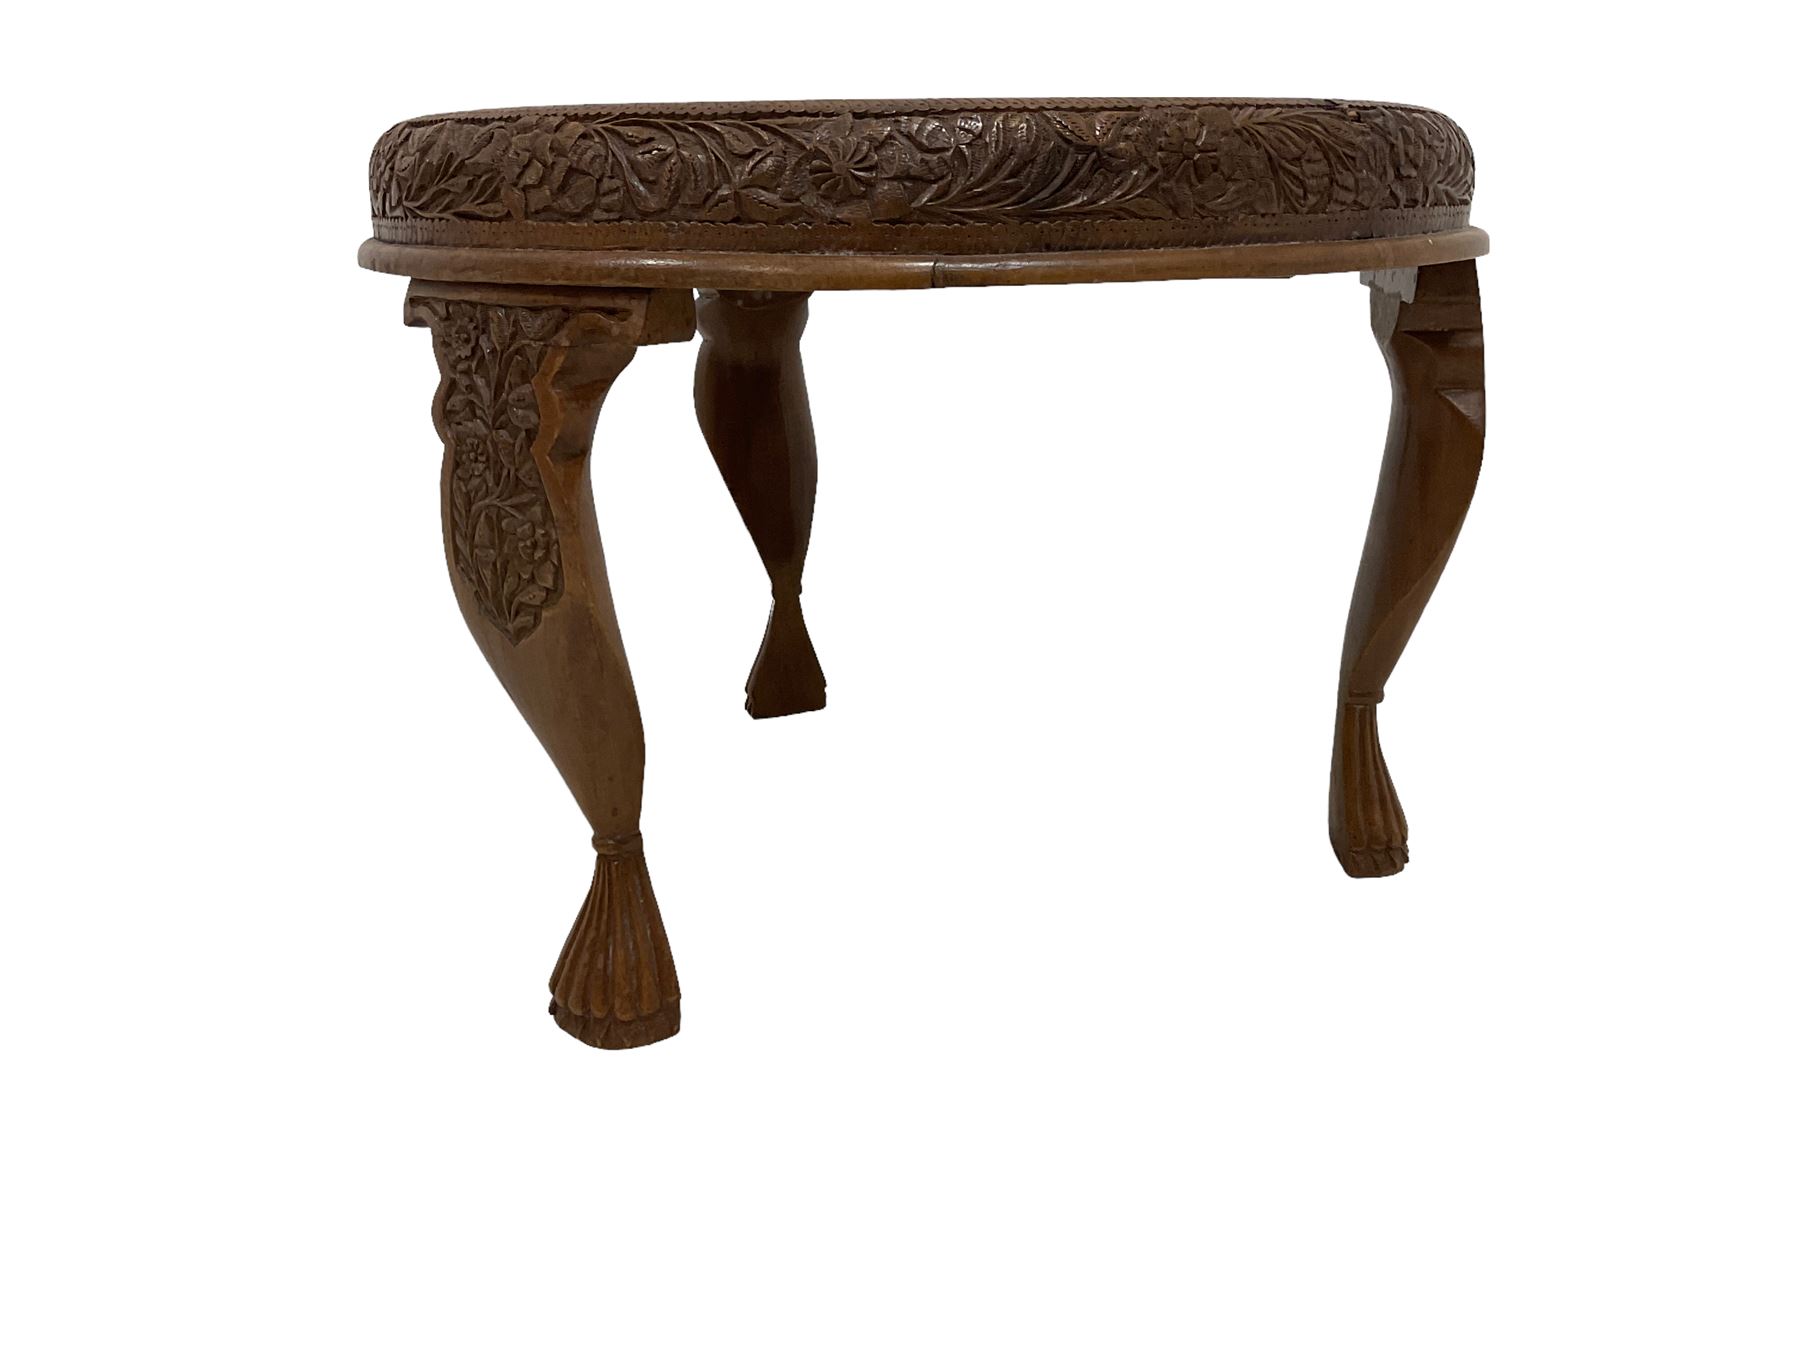 Early 20th century carved Burmese hardwood occasional table - Image 2 of 4